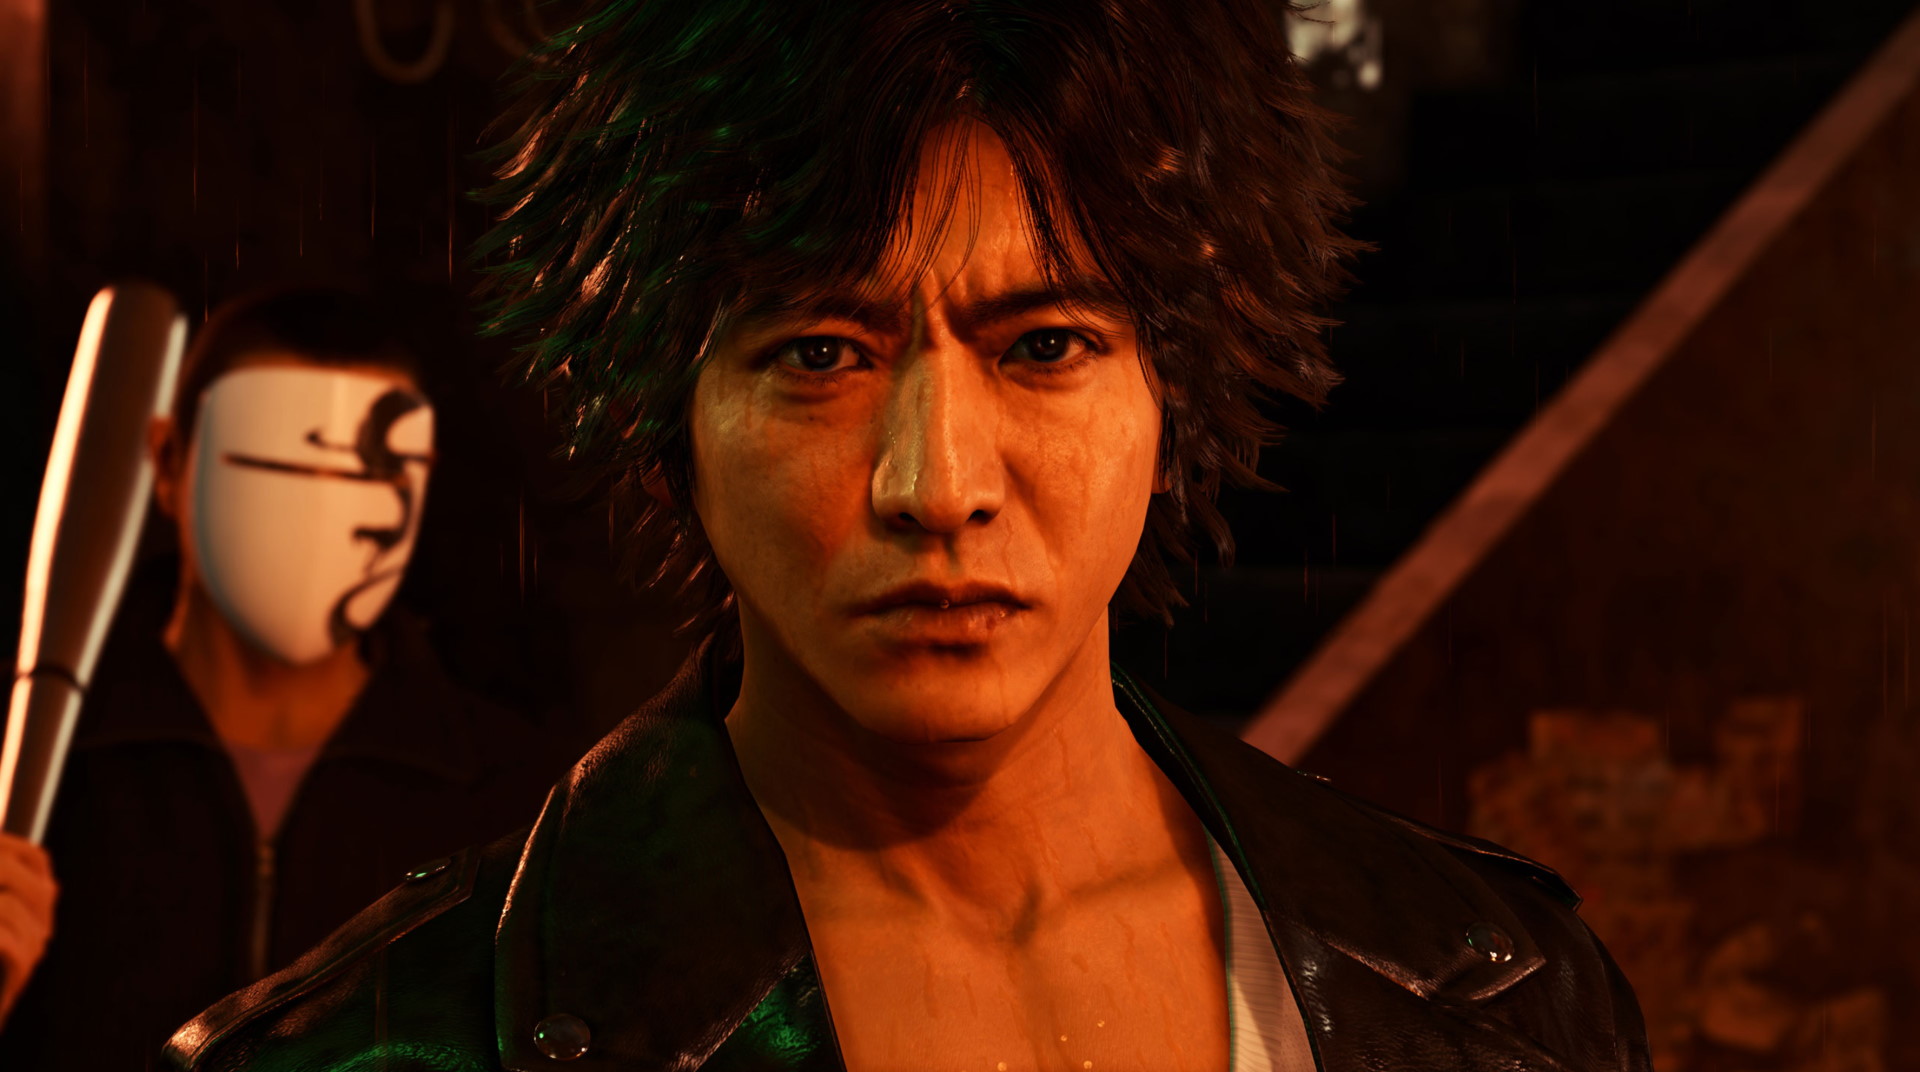  Sega says Lost Judgment isn't coming to PC 'at this time' 